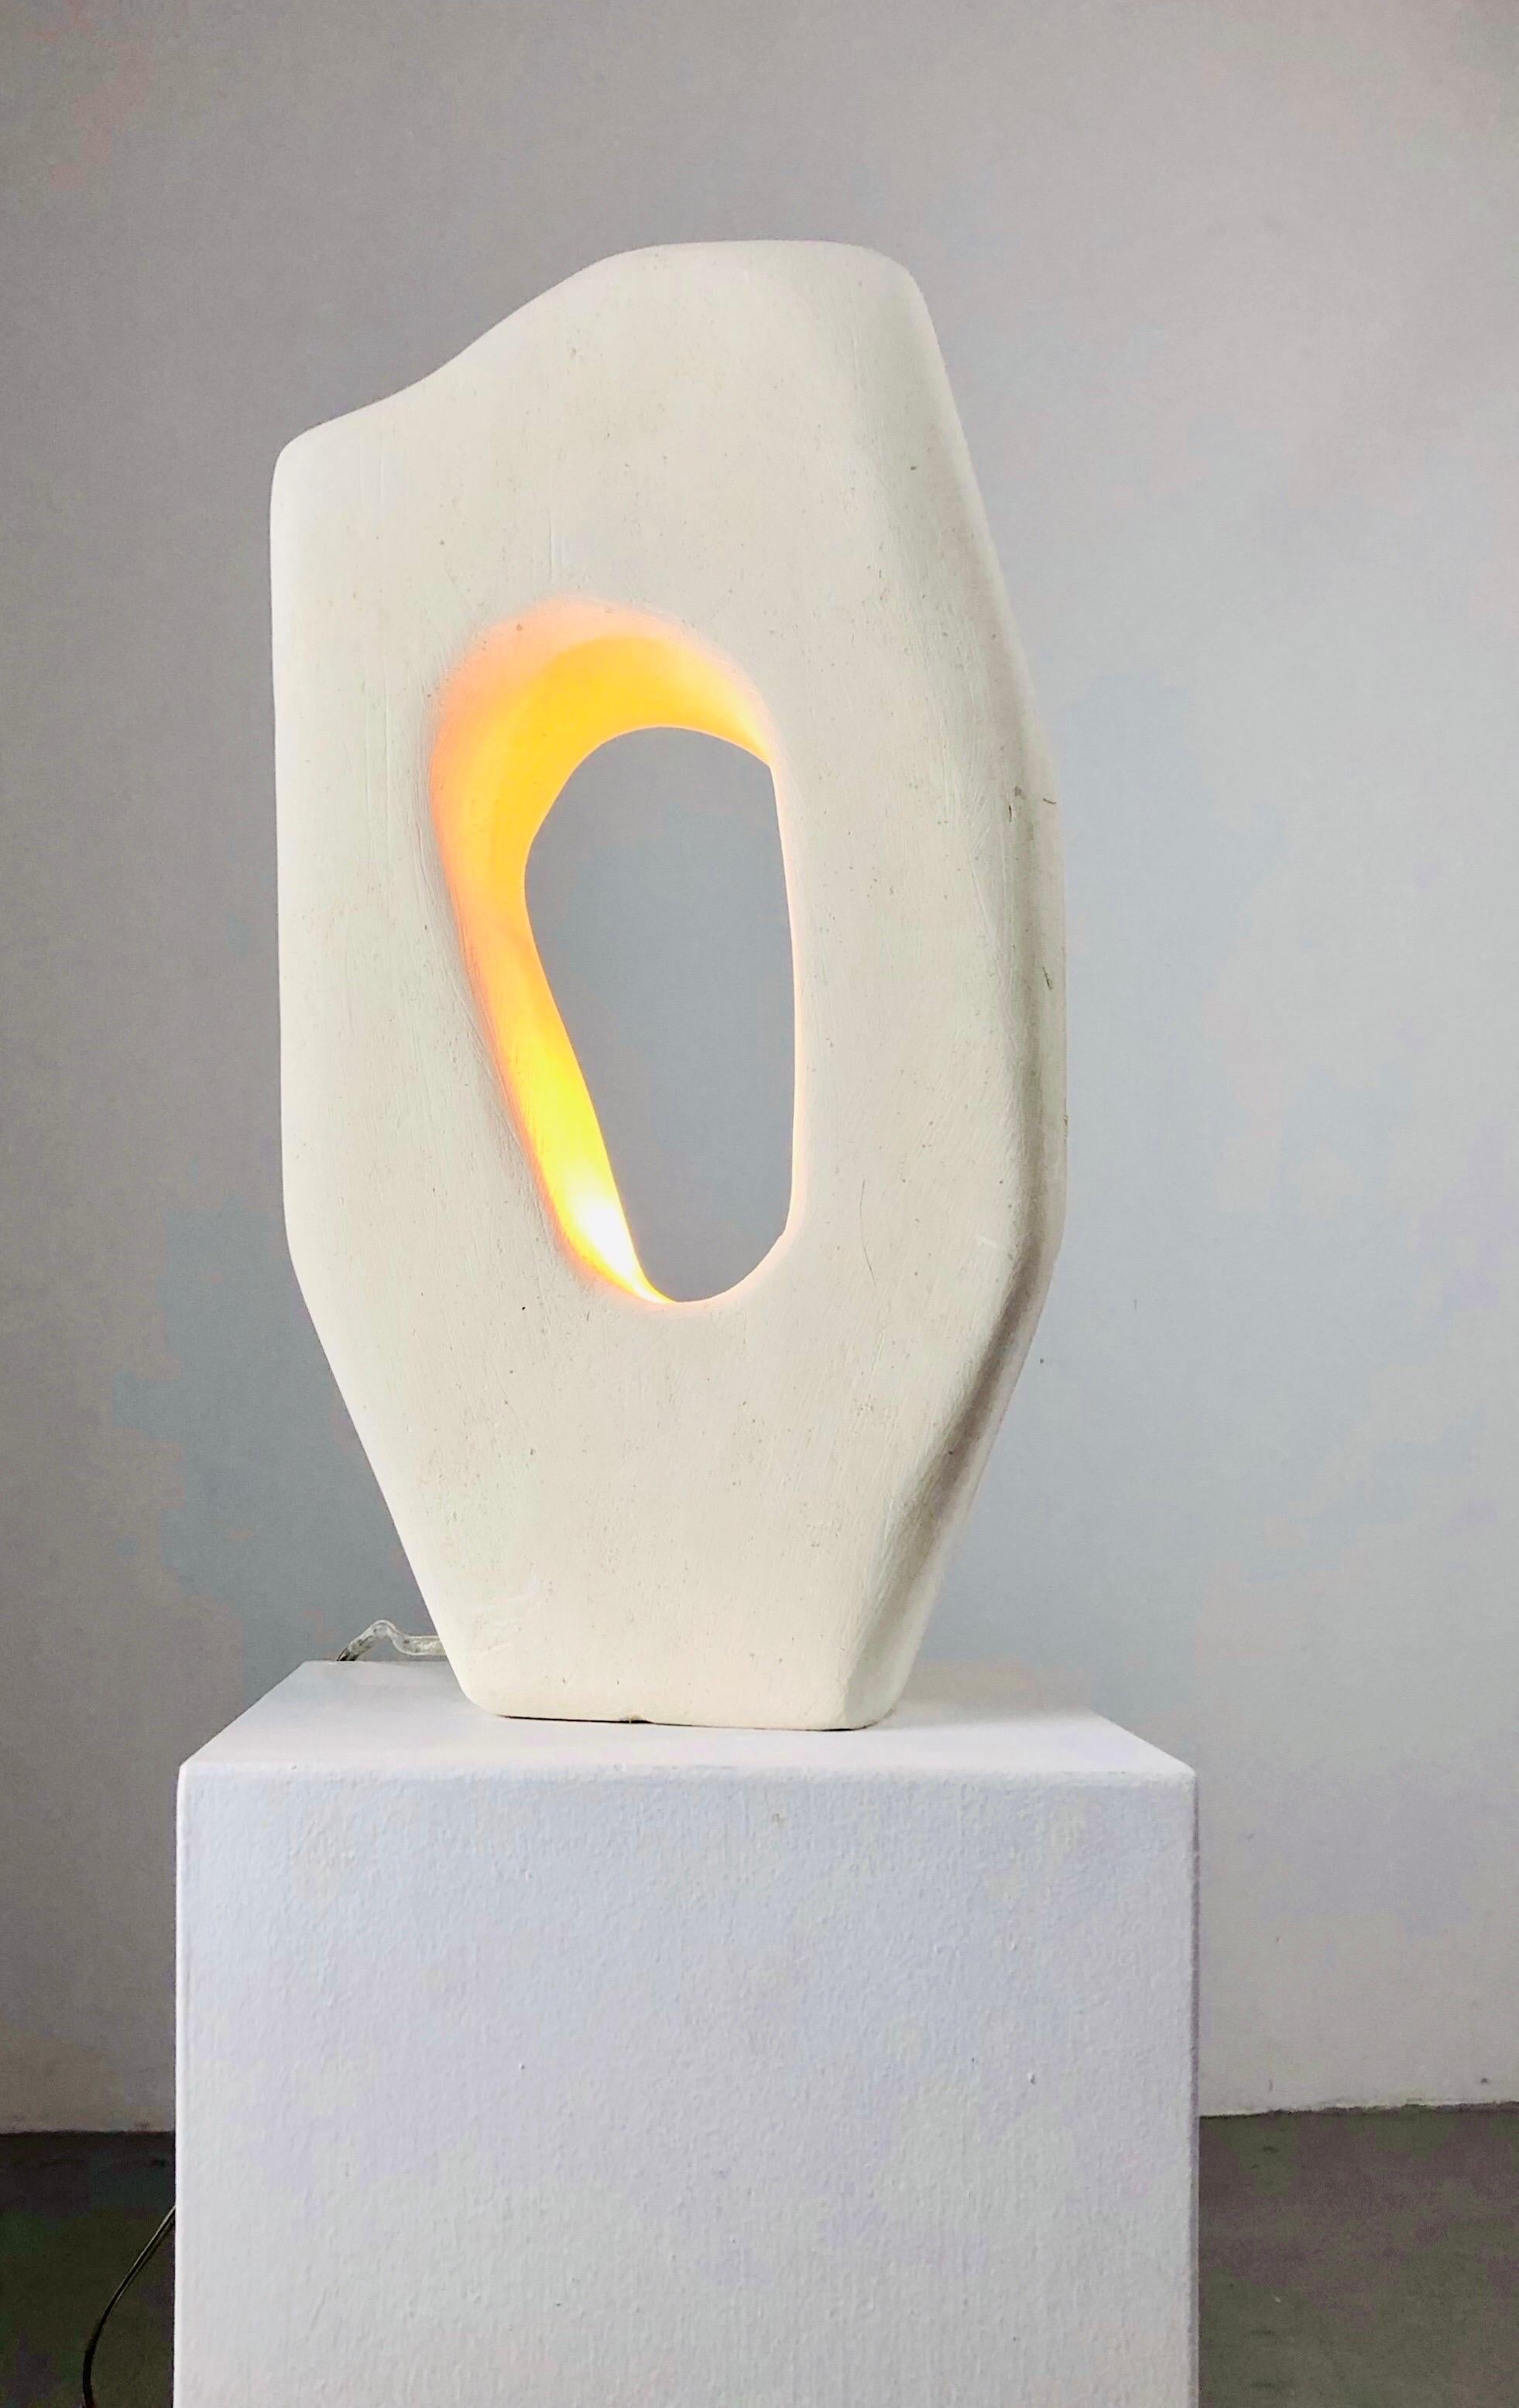 A 2010s solid carved limestone lamp, France by Michel Bonhomme, French artist.

Stunning shape, Lightbulb is hidden in the bottom of the stone.

Fully rewired, with lightbulb E14 and switch